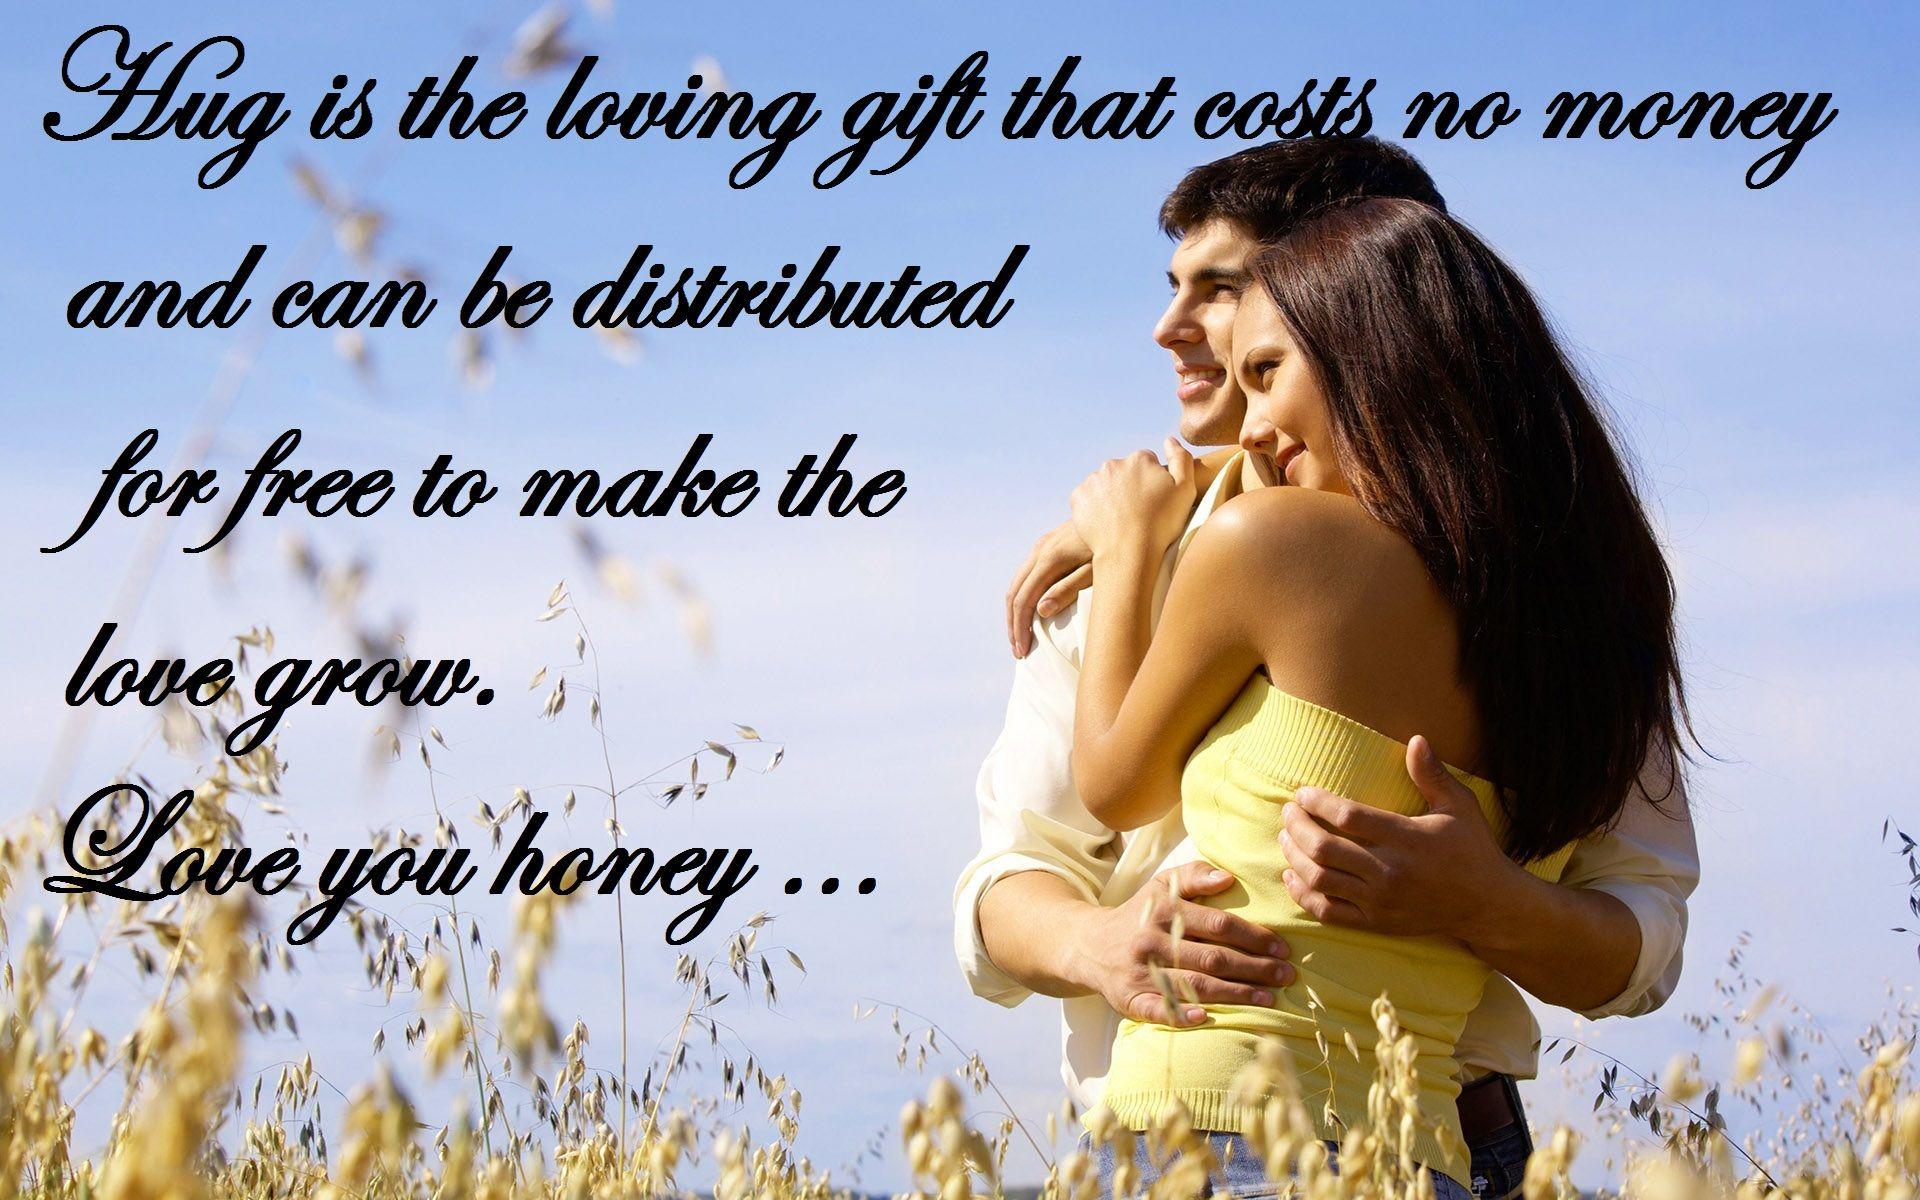 12th Feb*} Happy Hug day HD image 2018 quotes wishes messages